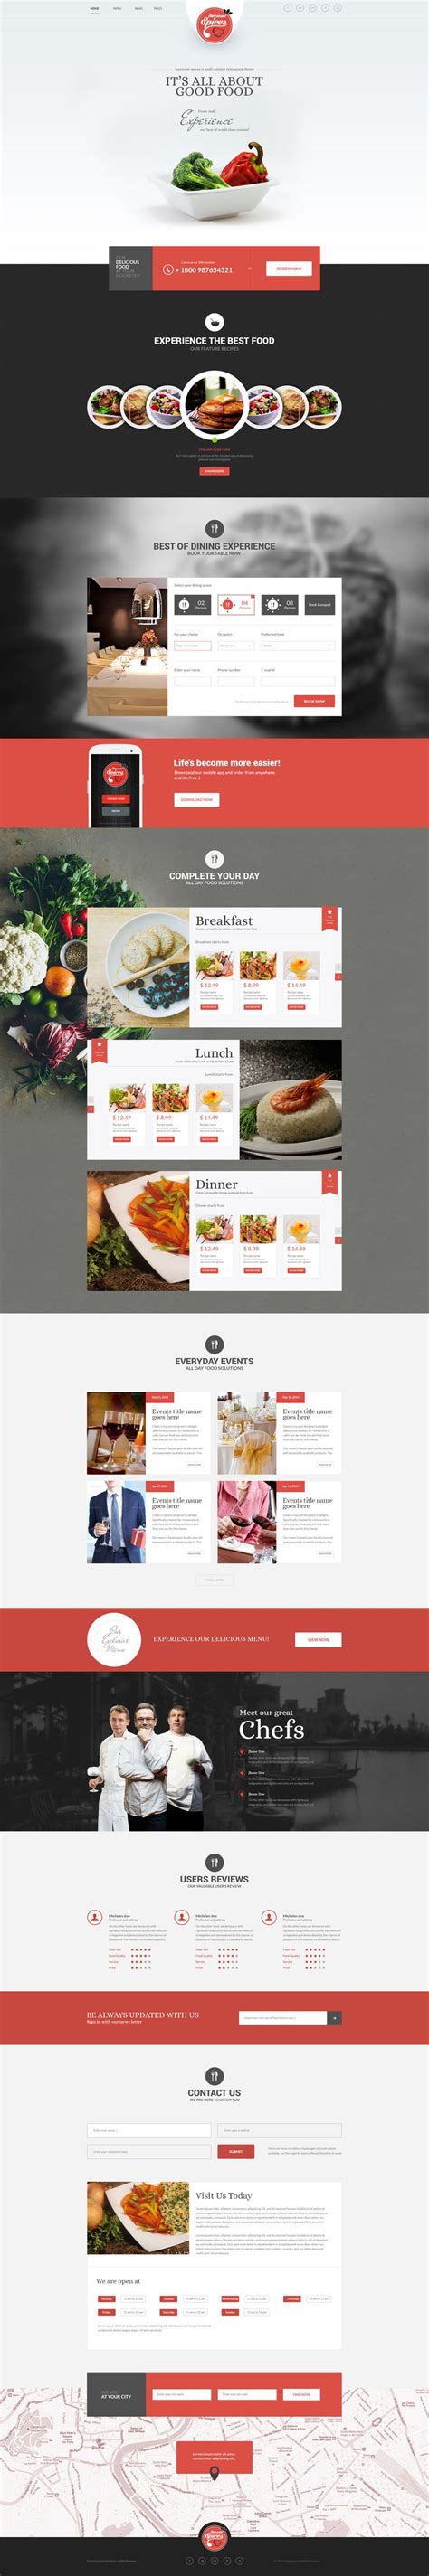 Awesome Spice-One Page Restaurant Theme Preview - ThemeForest | Food web design, Web design ...